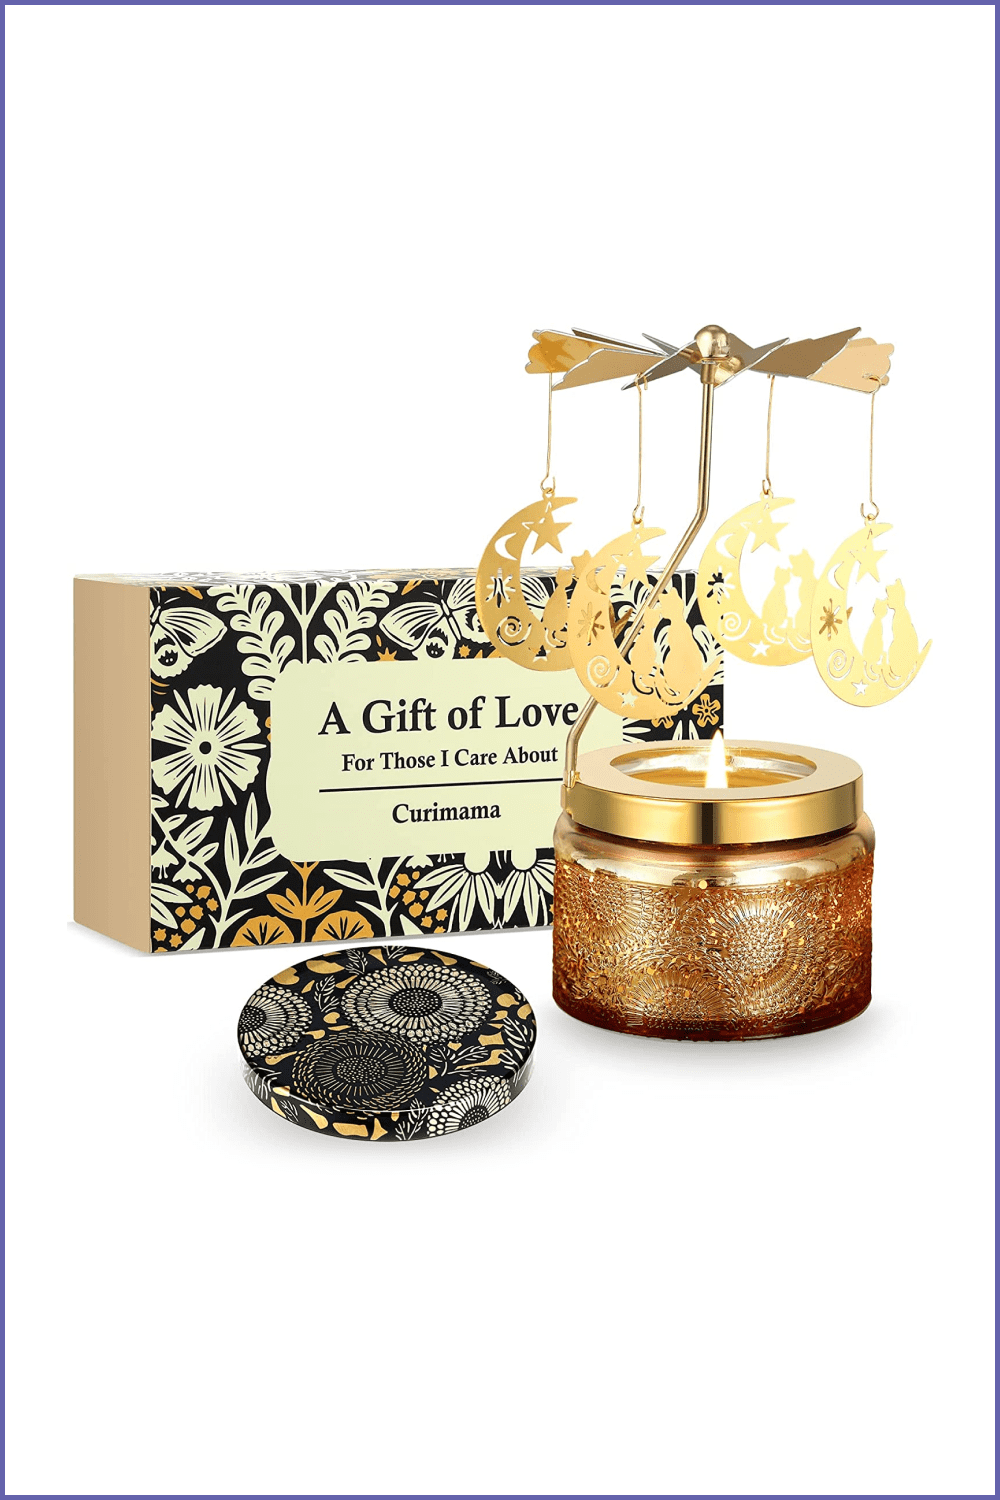 Photo of a golden candle with decorative elements.